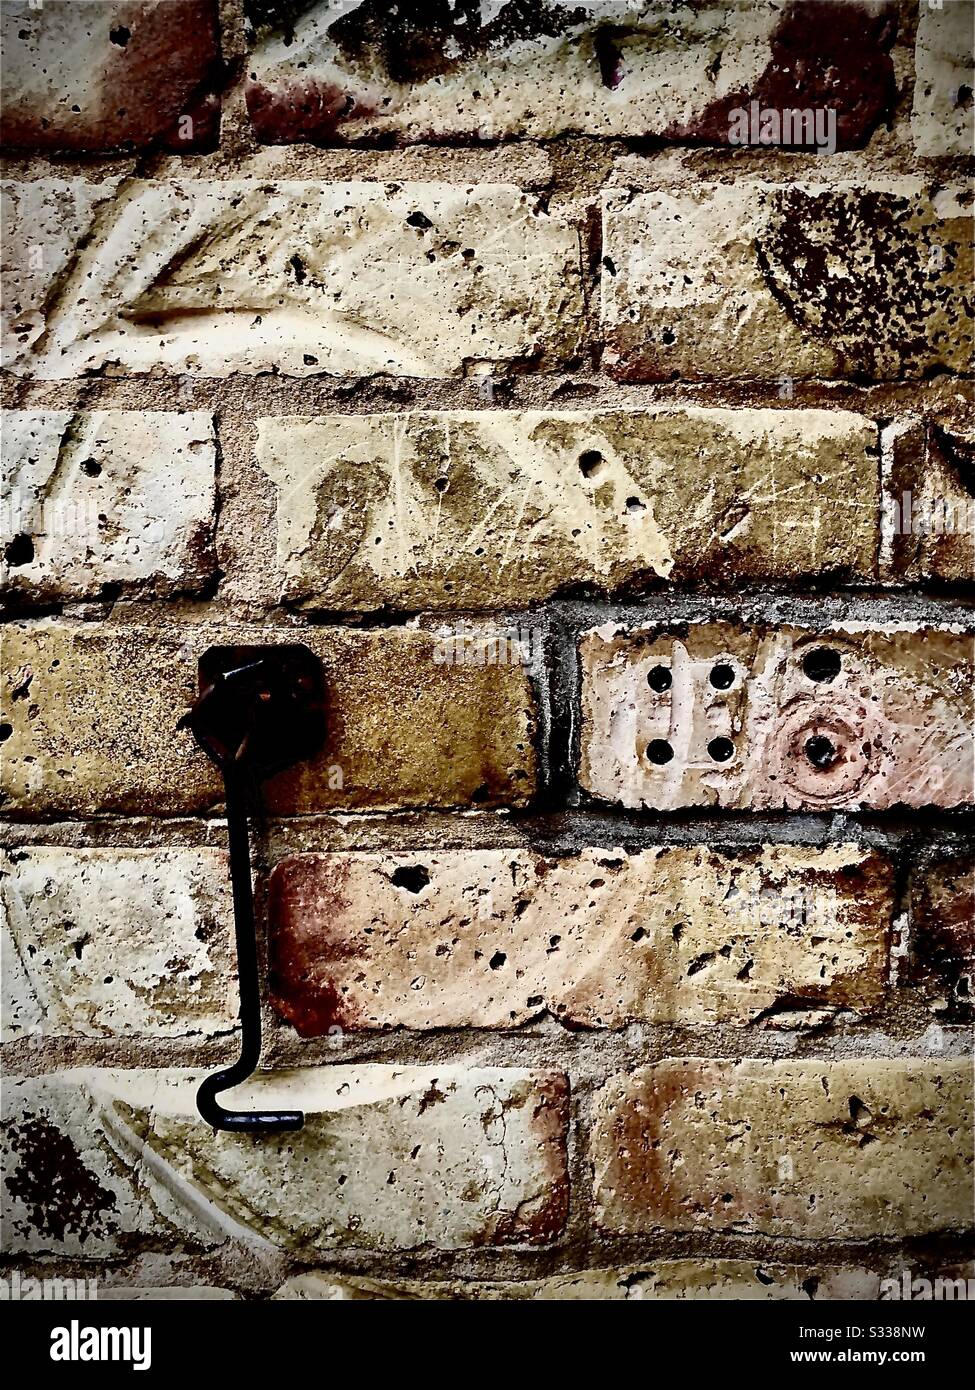 Brick wall worn down by metal door latch which is hanging down. Other marks and holes eroded and warn into h texture. Stock Photo